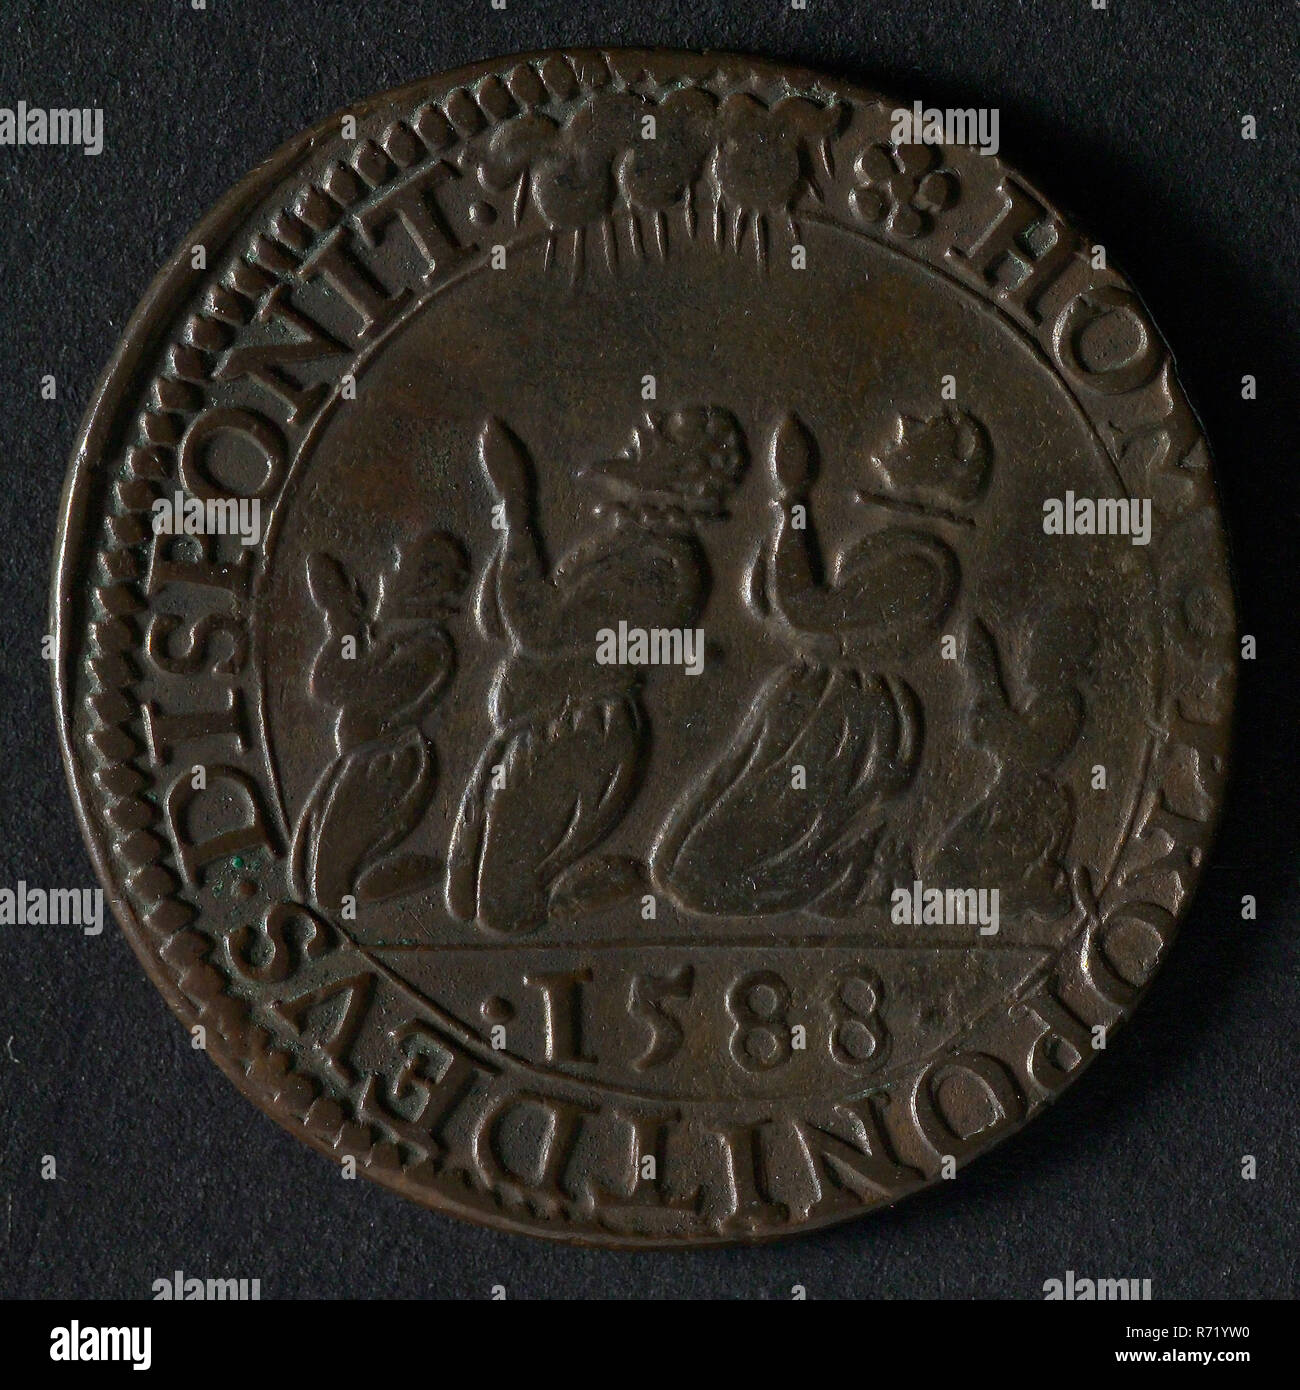 Medal on the downfall of the Invincible Fleet, jeton utility medal medal exchange buyer, Front: man woman and two children kneeling. Omschrift with rose. Year in cut-off, omschrift (roos) HOMO PROPONIT DEVS DISPONIT (man decides but God disposes) cut .1588. Armada invincible fleet Zeeland Stock Photo